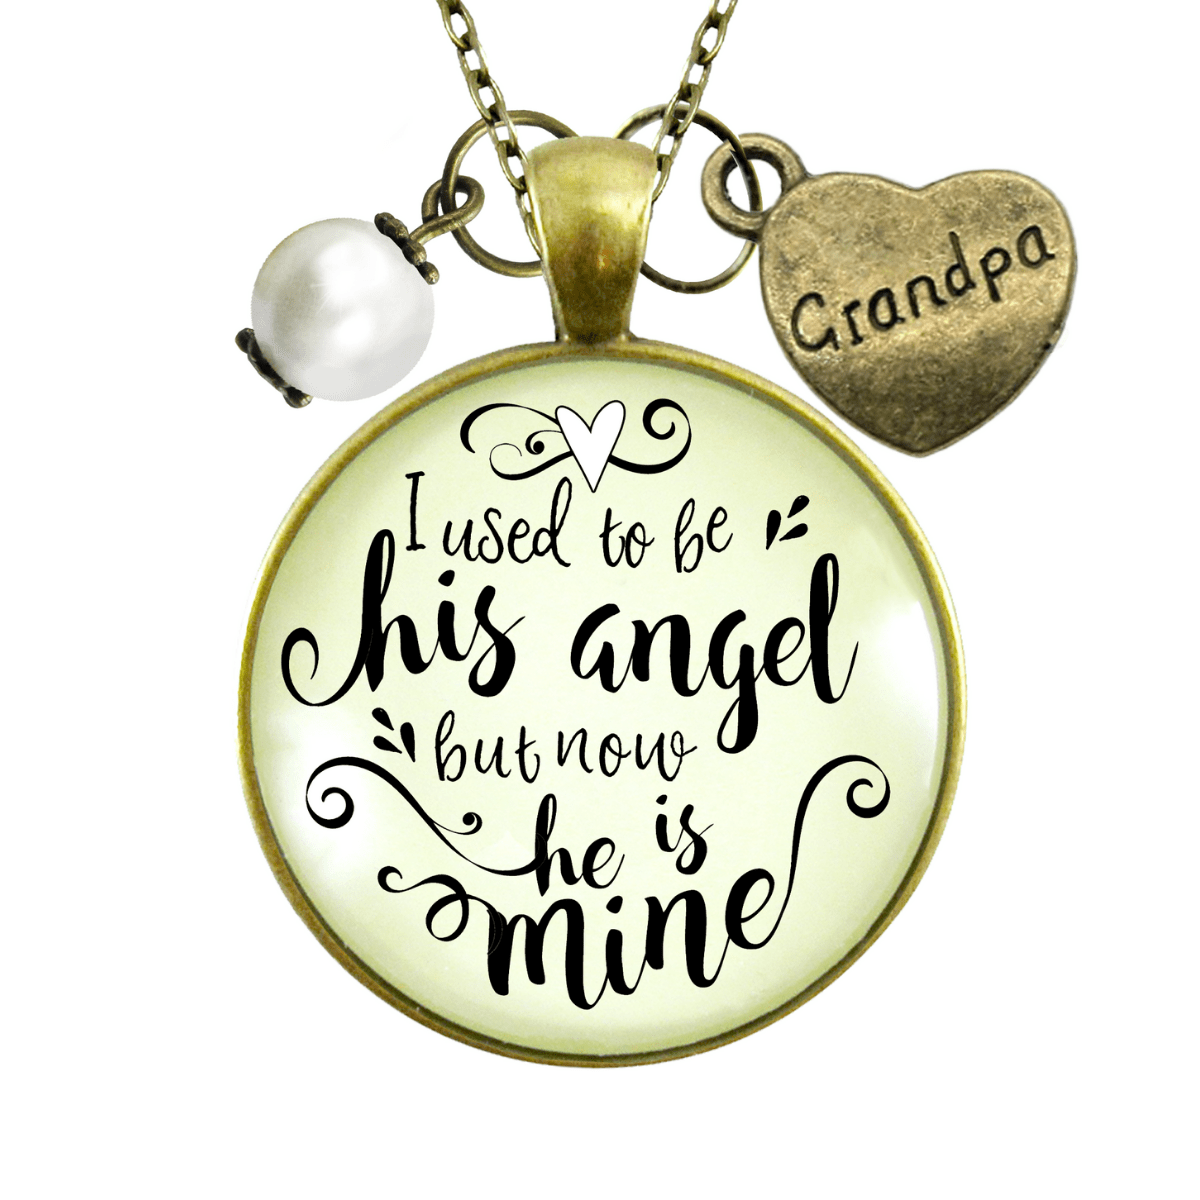 Gutsy Goodness Grandpa Memorial Necklace I Used to Be His Angel Now He's Mine Remembrance Gift - Gutsy Goodness;Grandpa Memorial Necklace I Used To Be His Angel Now He's Mine Remembrance Gift - Gutsy Goodness Handmade Jewelry Gifts